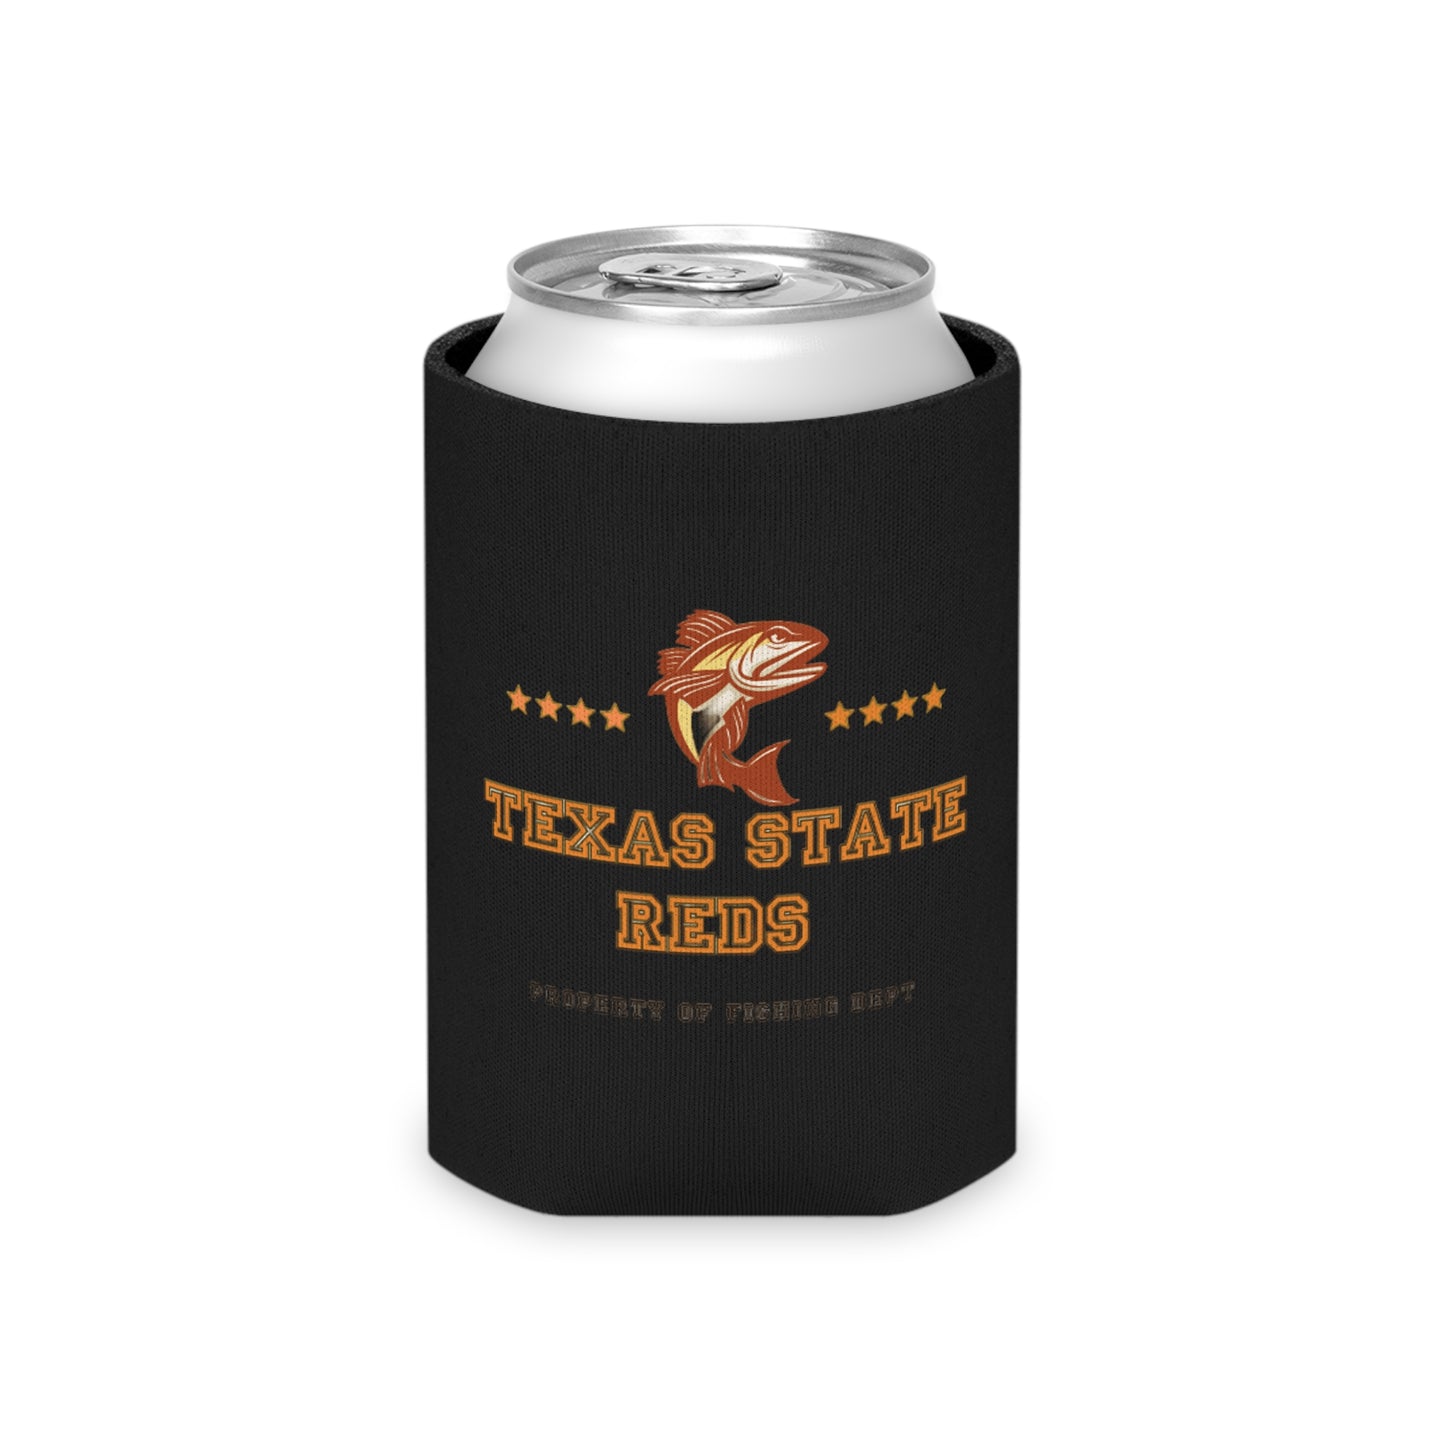 Texas State Reds Property Can Cooler